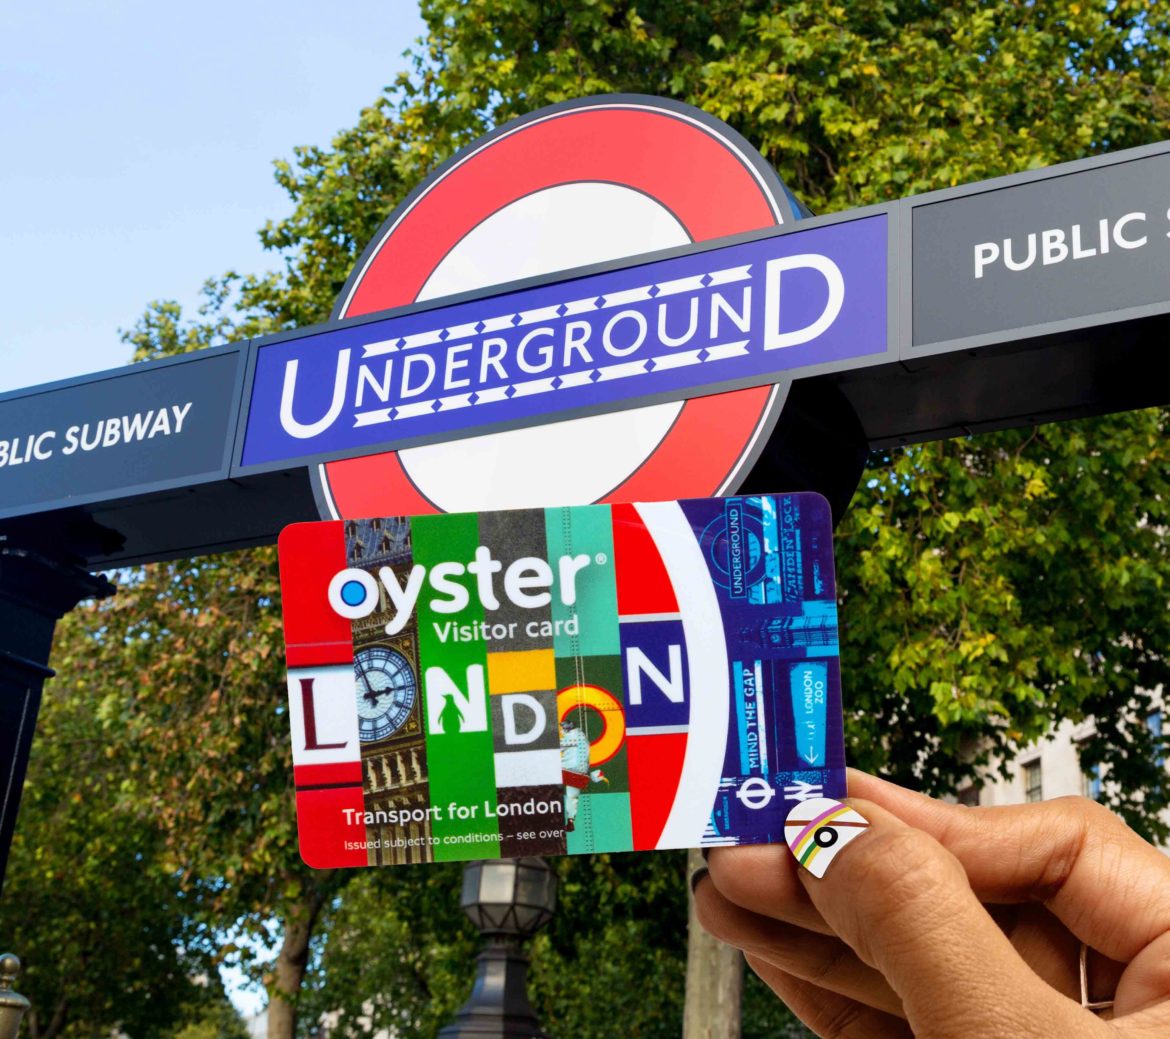 visitor_oyster_card_londres